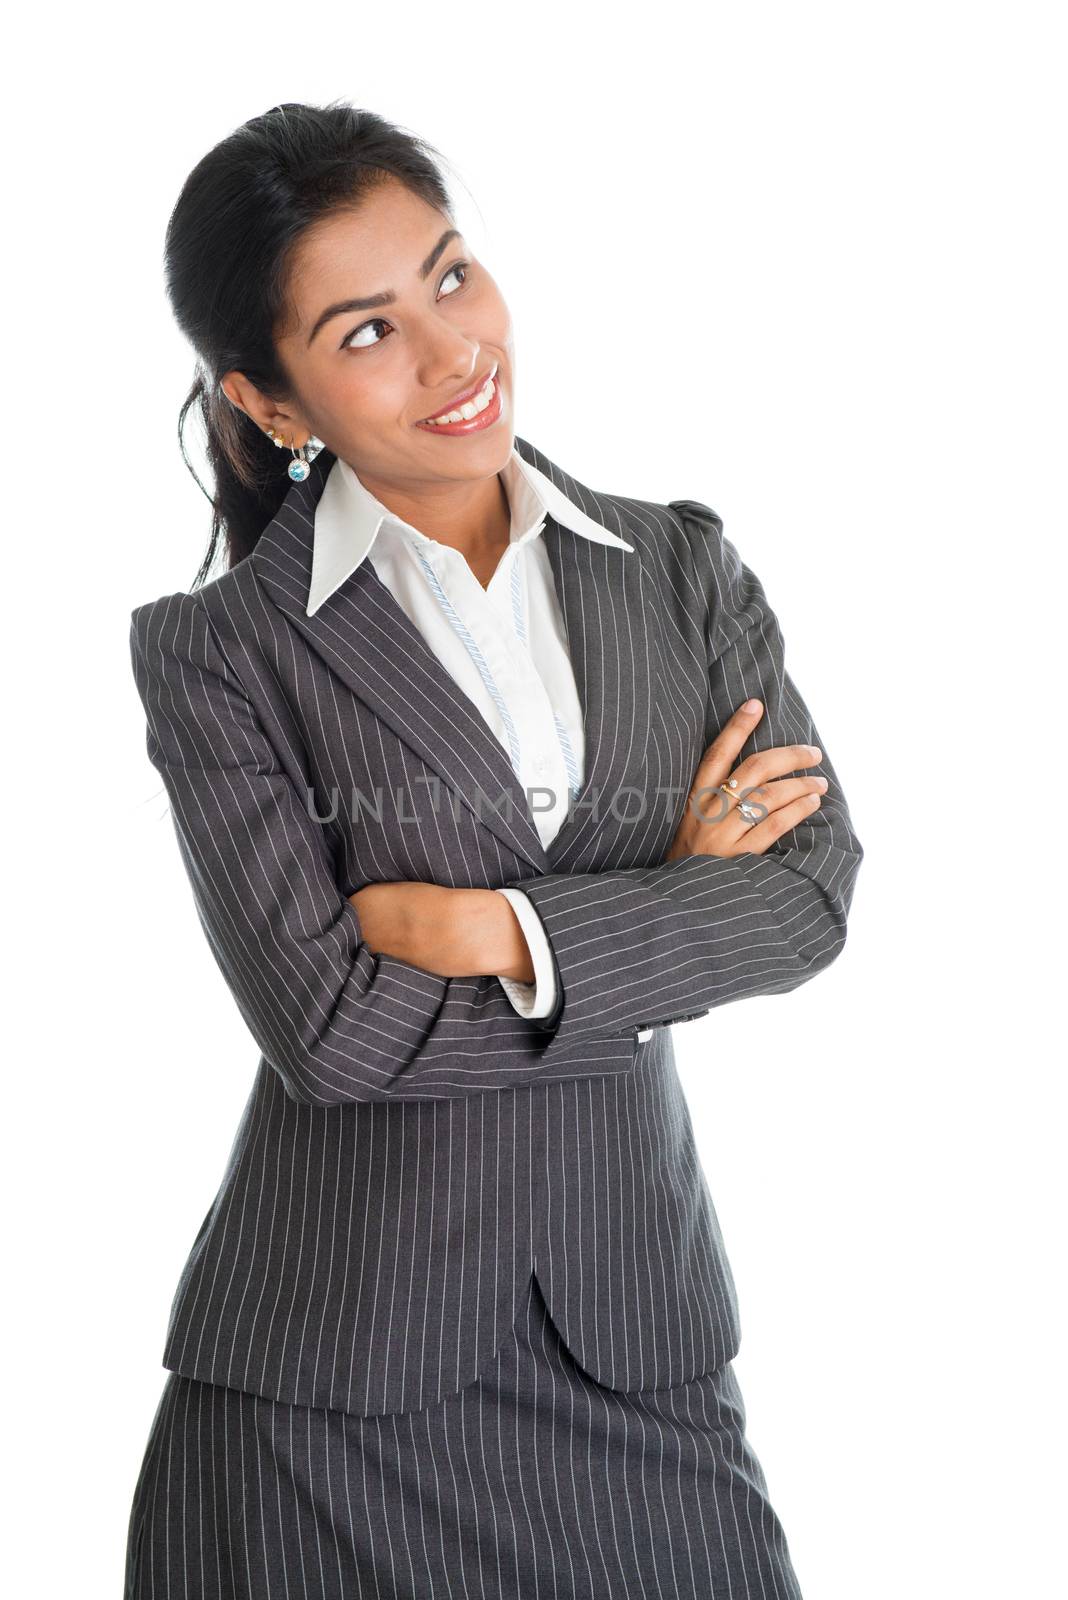 Portrait of black business woman in formalwear arms crossed and smiling, looking away, isolated on white background.